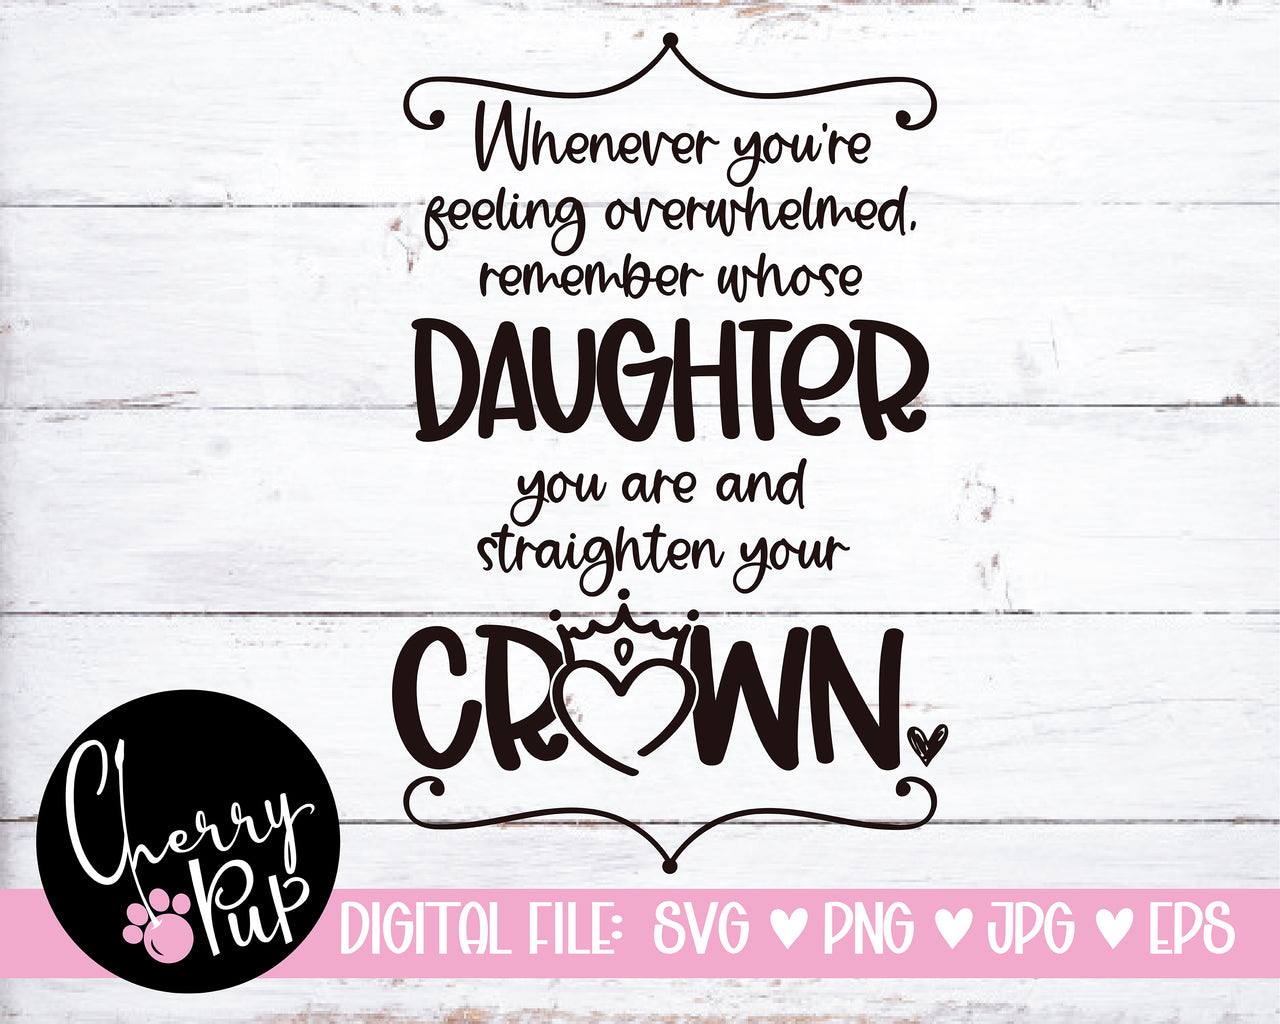 Remember Whose Daughter You Are And Straighten Your Crown SVG